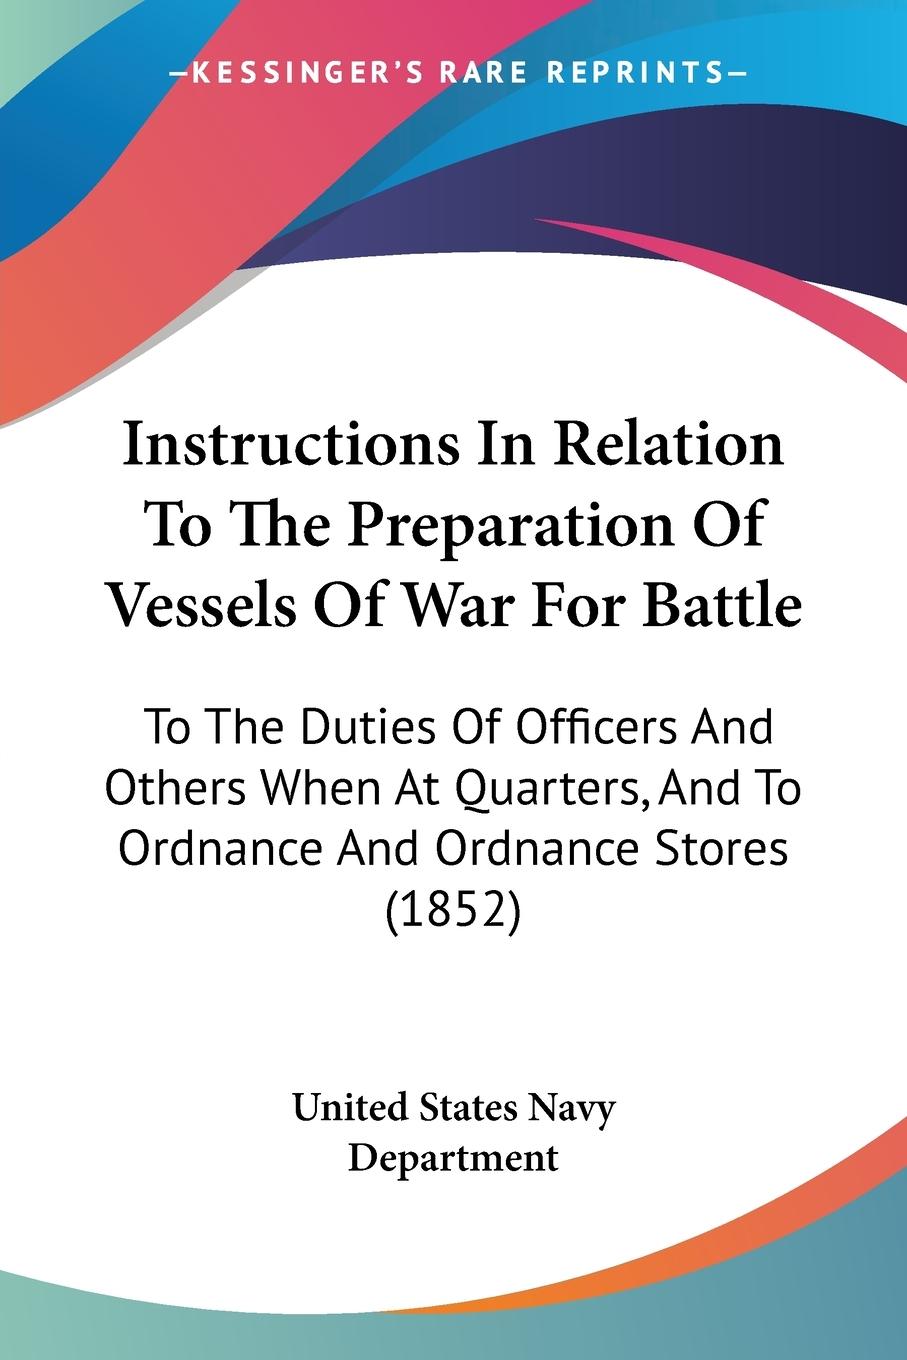 Instructions In Relation To The Preparation Of Vessels Of War For Battle - United States Navy Department